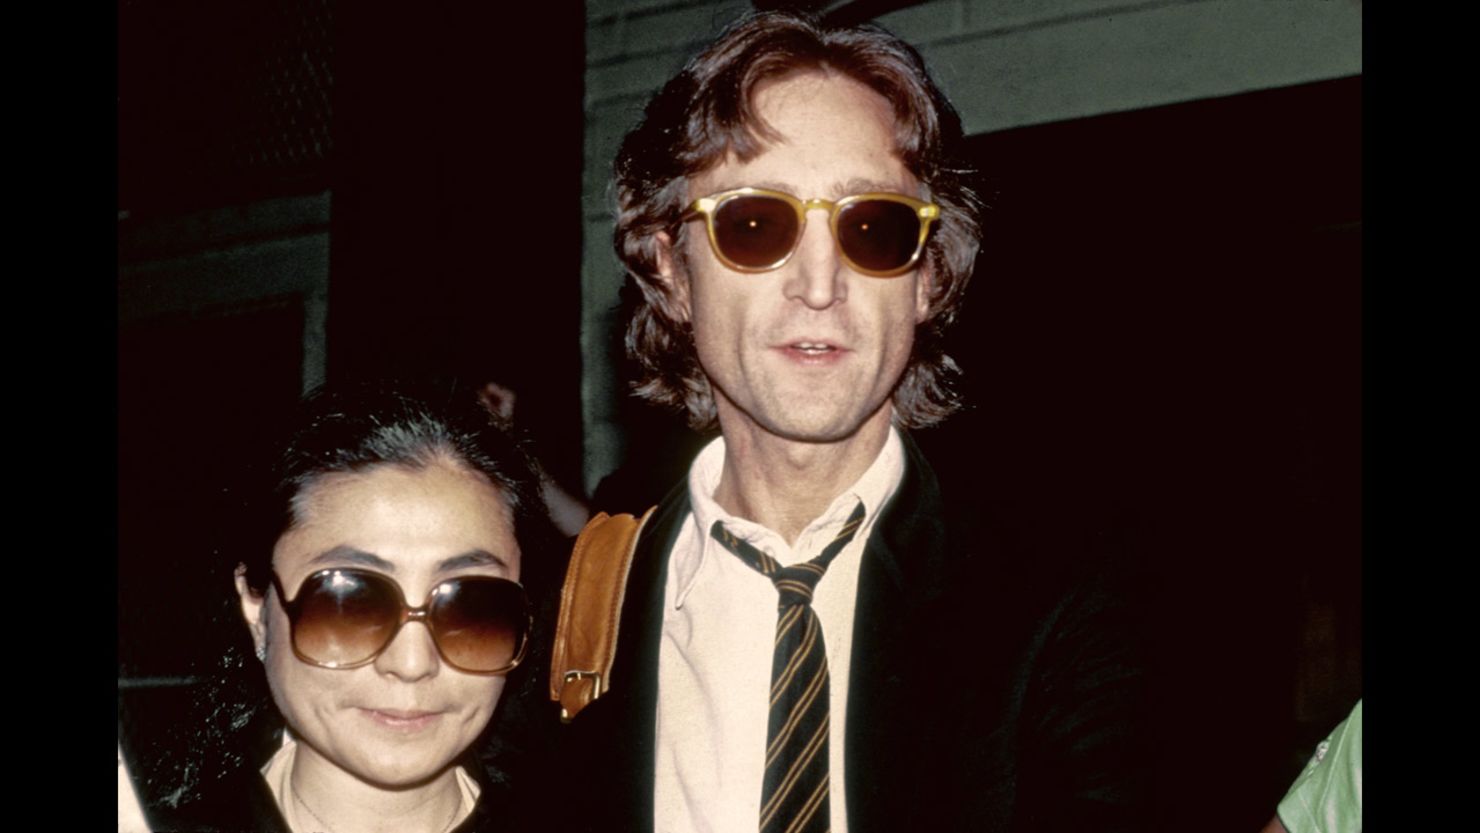  Former Beatle John Lennon and his wife, Yoko Ono,  in August 1980 in New York. 